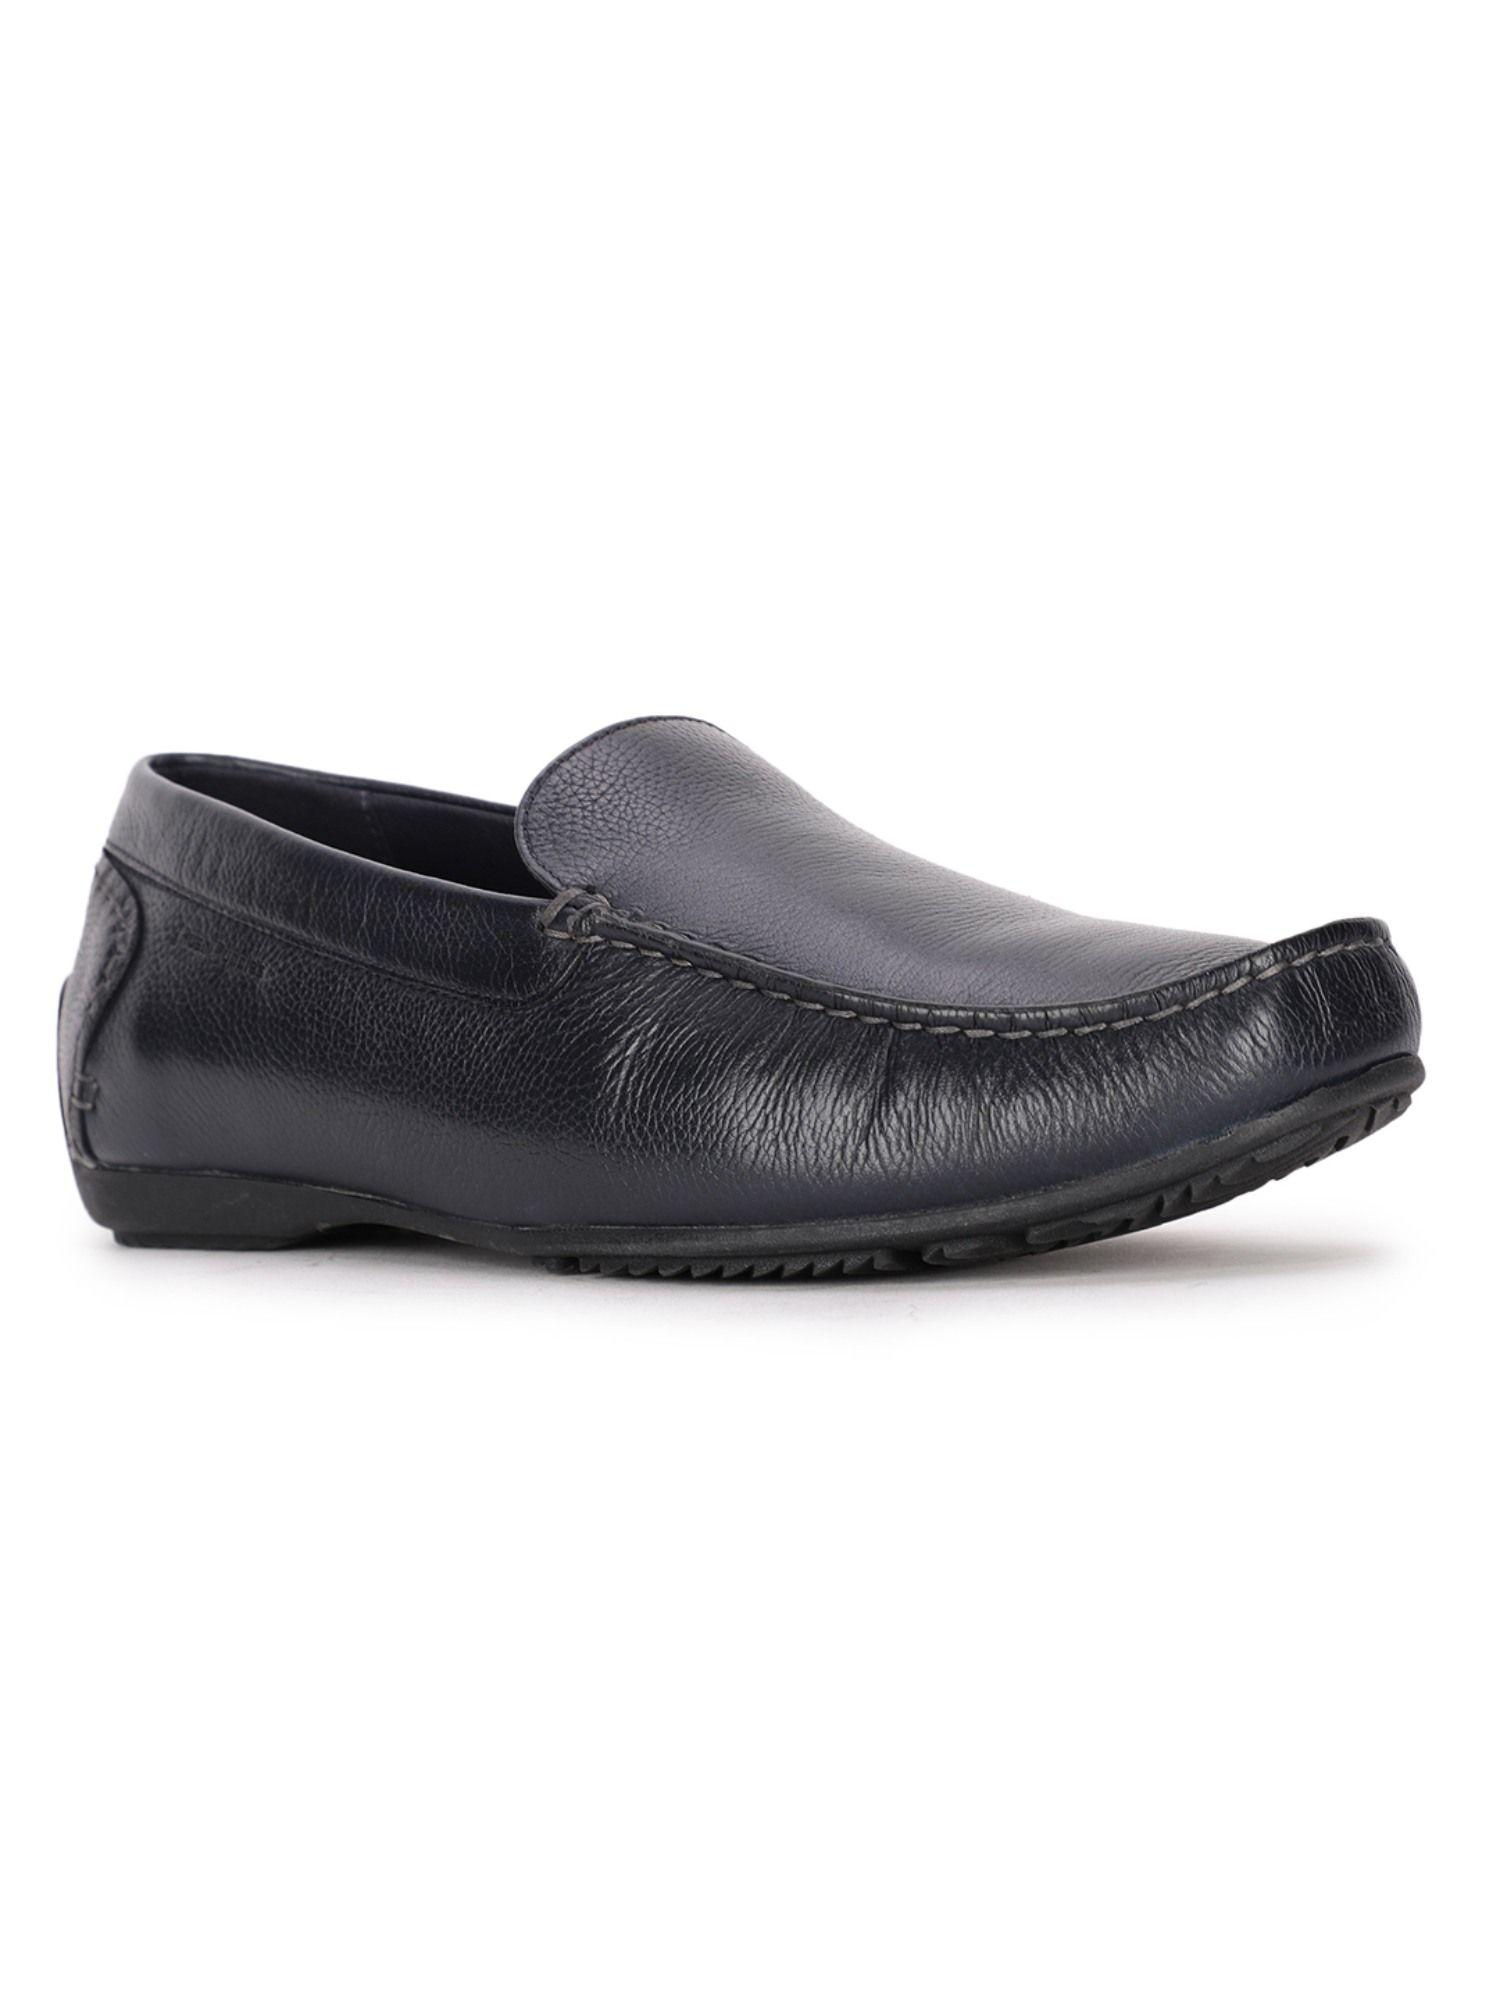 navy-blue-casual-shoes-for-men